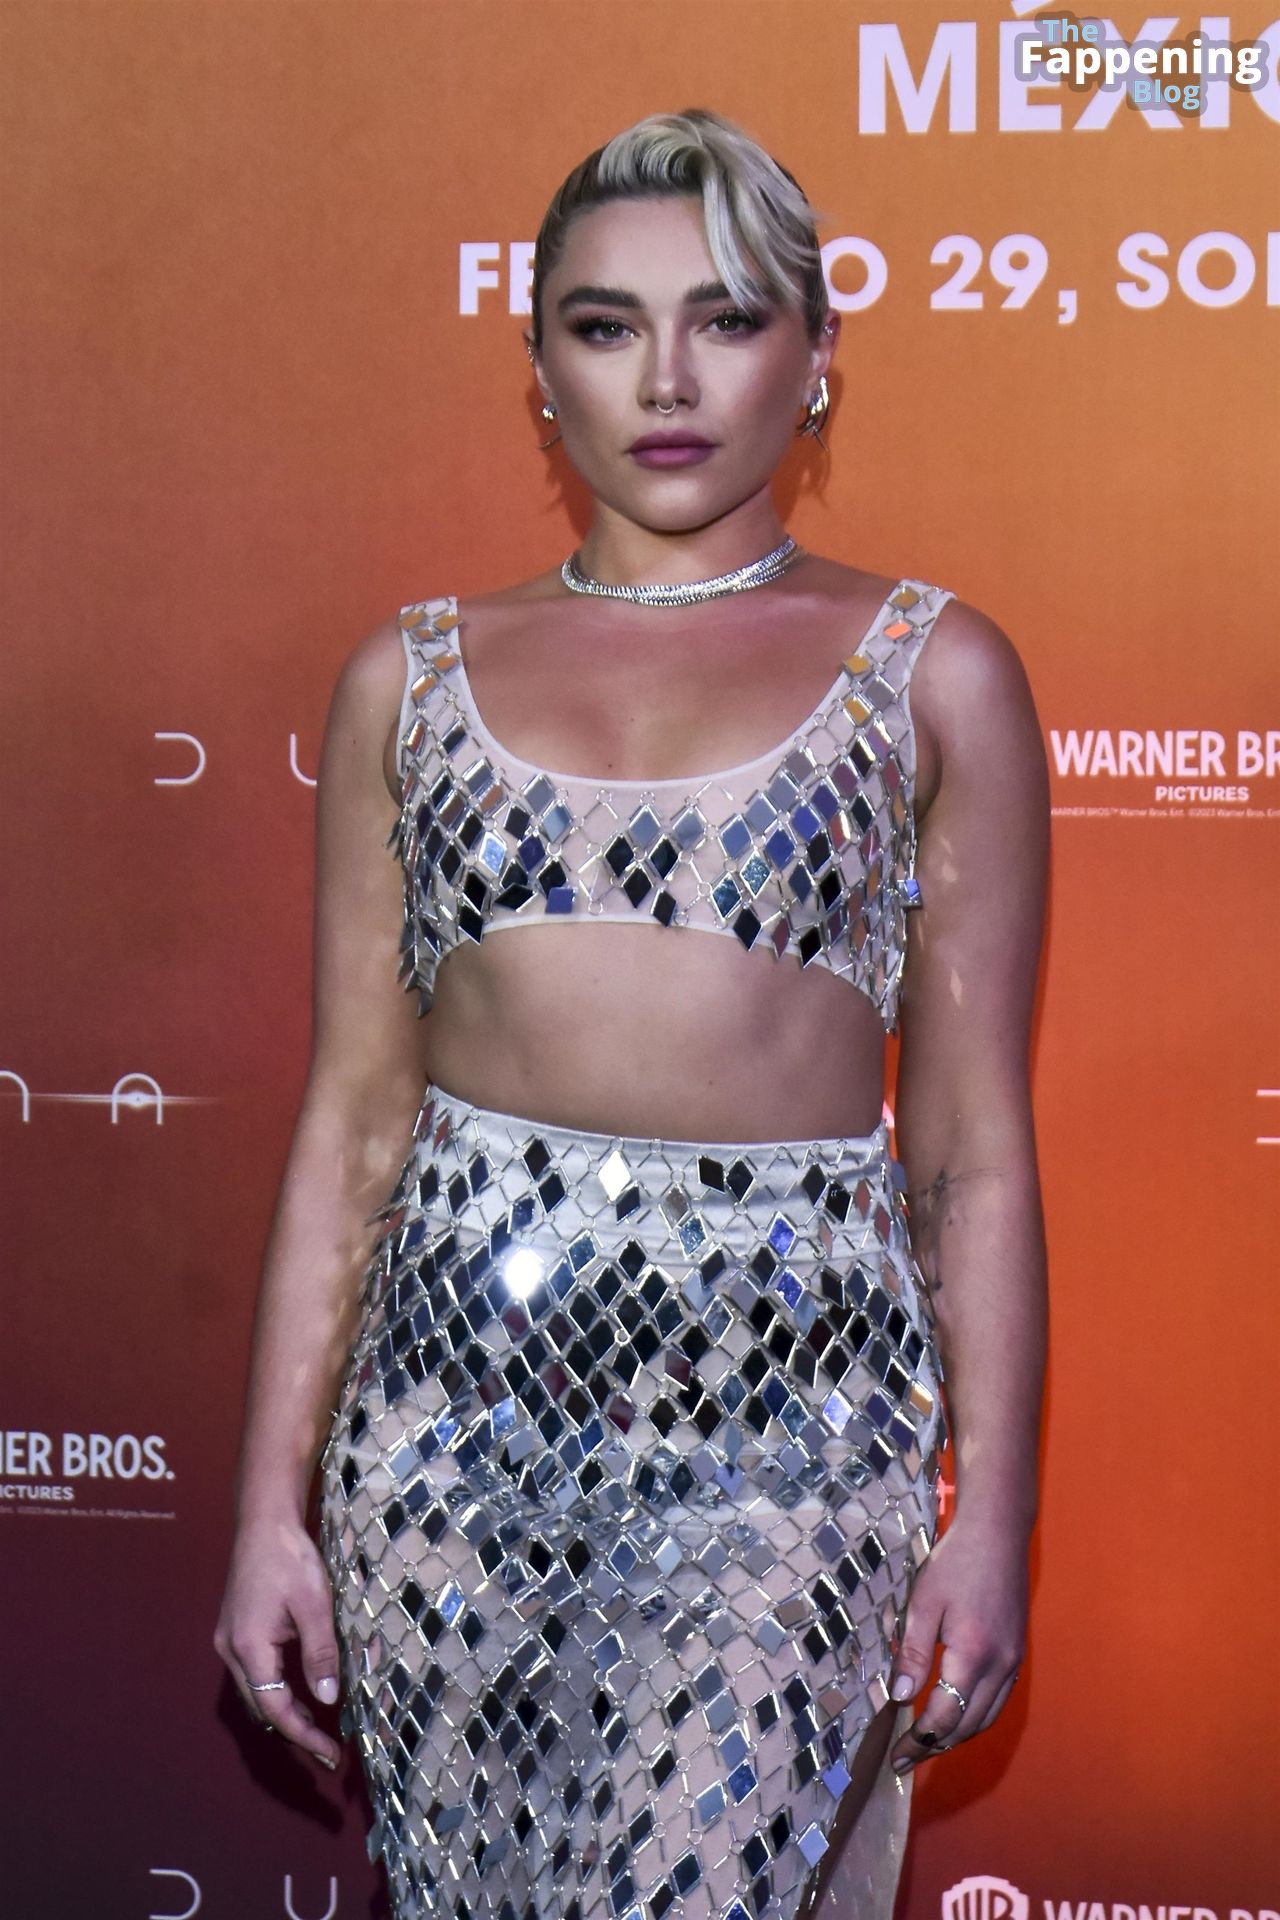 Florence-Pugh-Sexy-65-The-Fappening-Blog.jpg